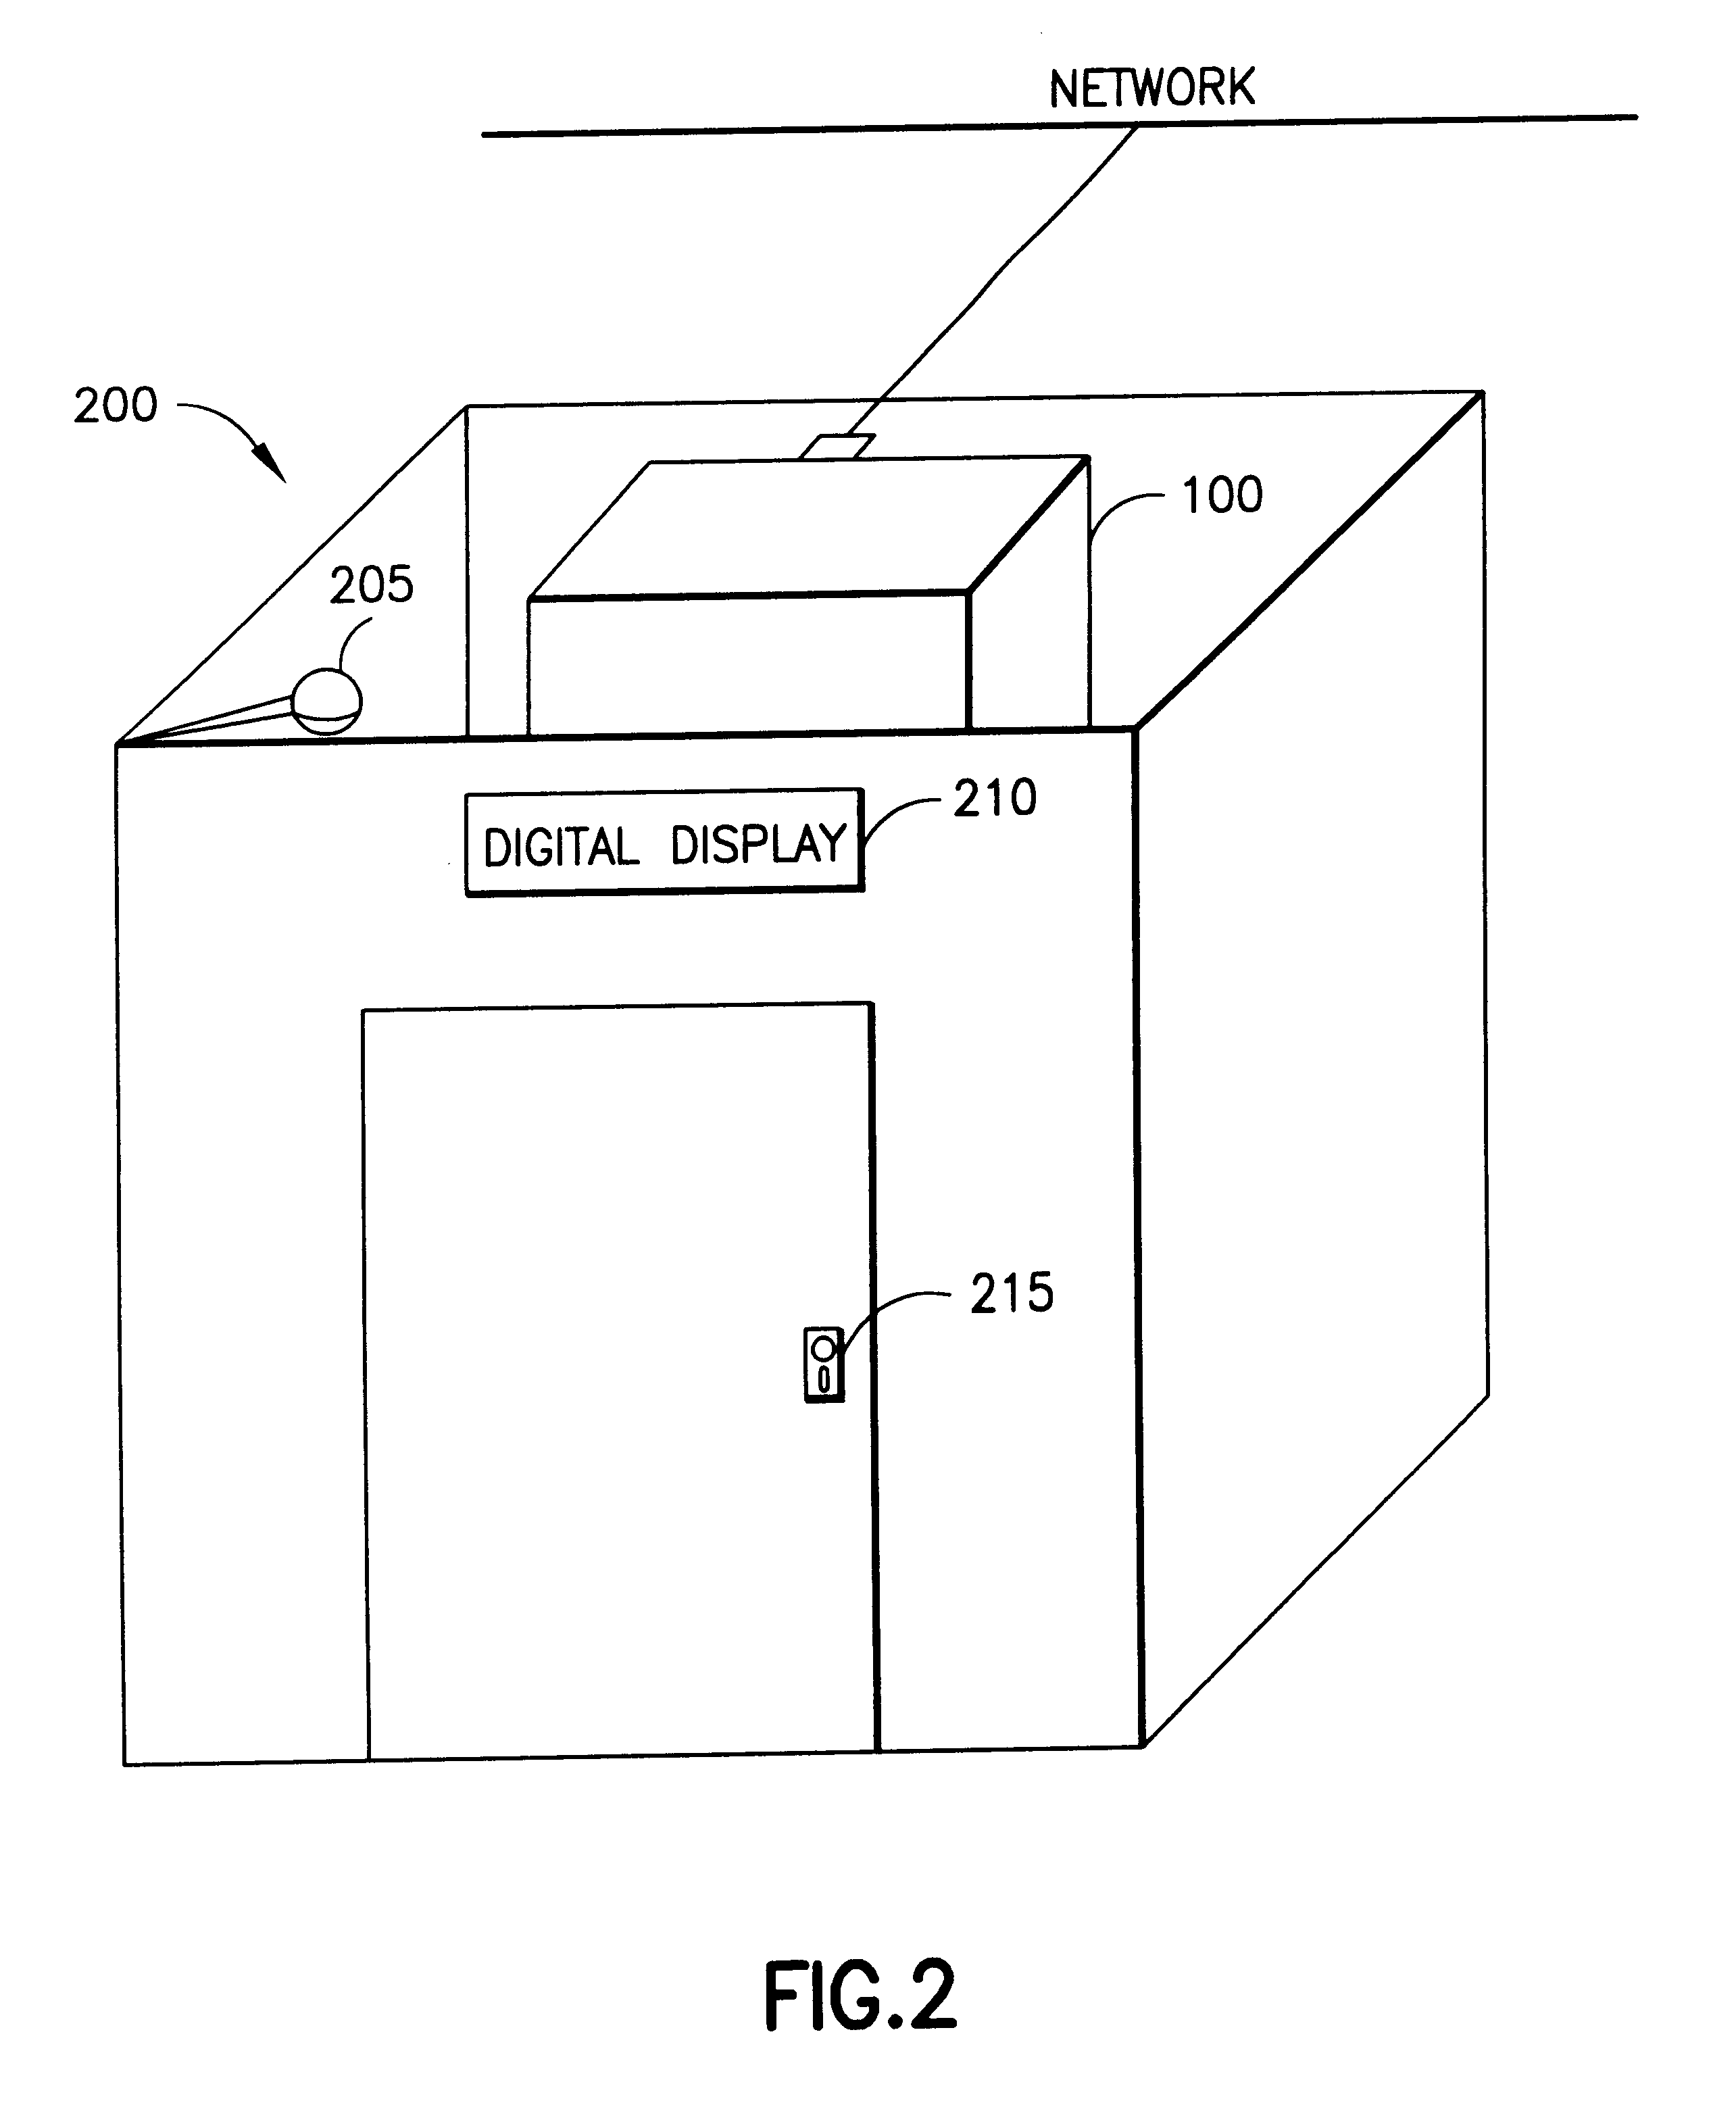 Server for reconfiguring control of a subset of devices on one or more kiosks